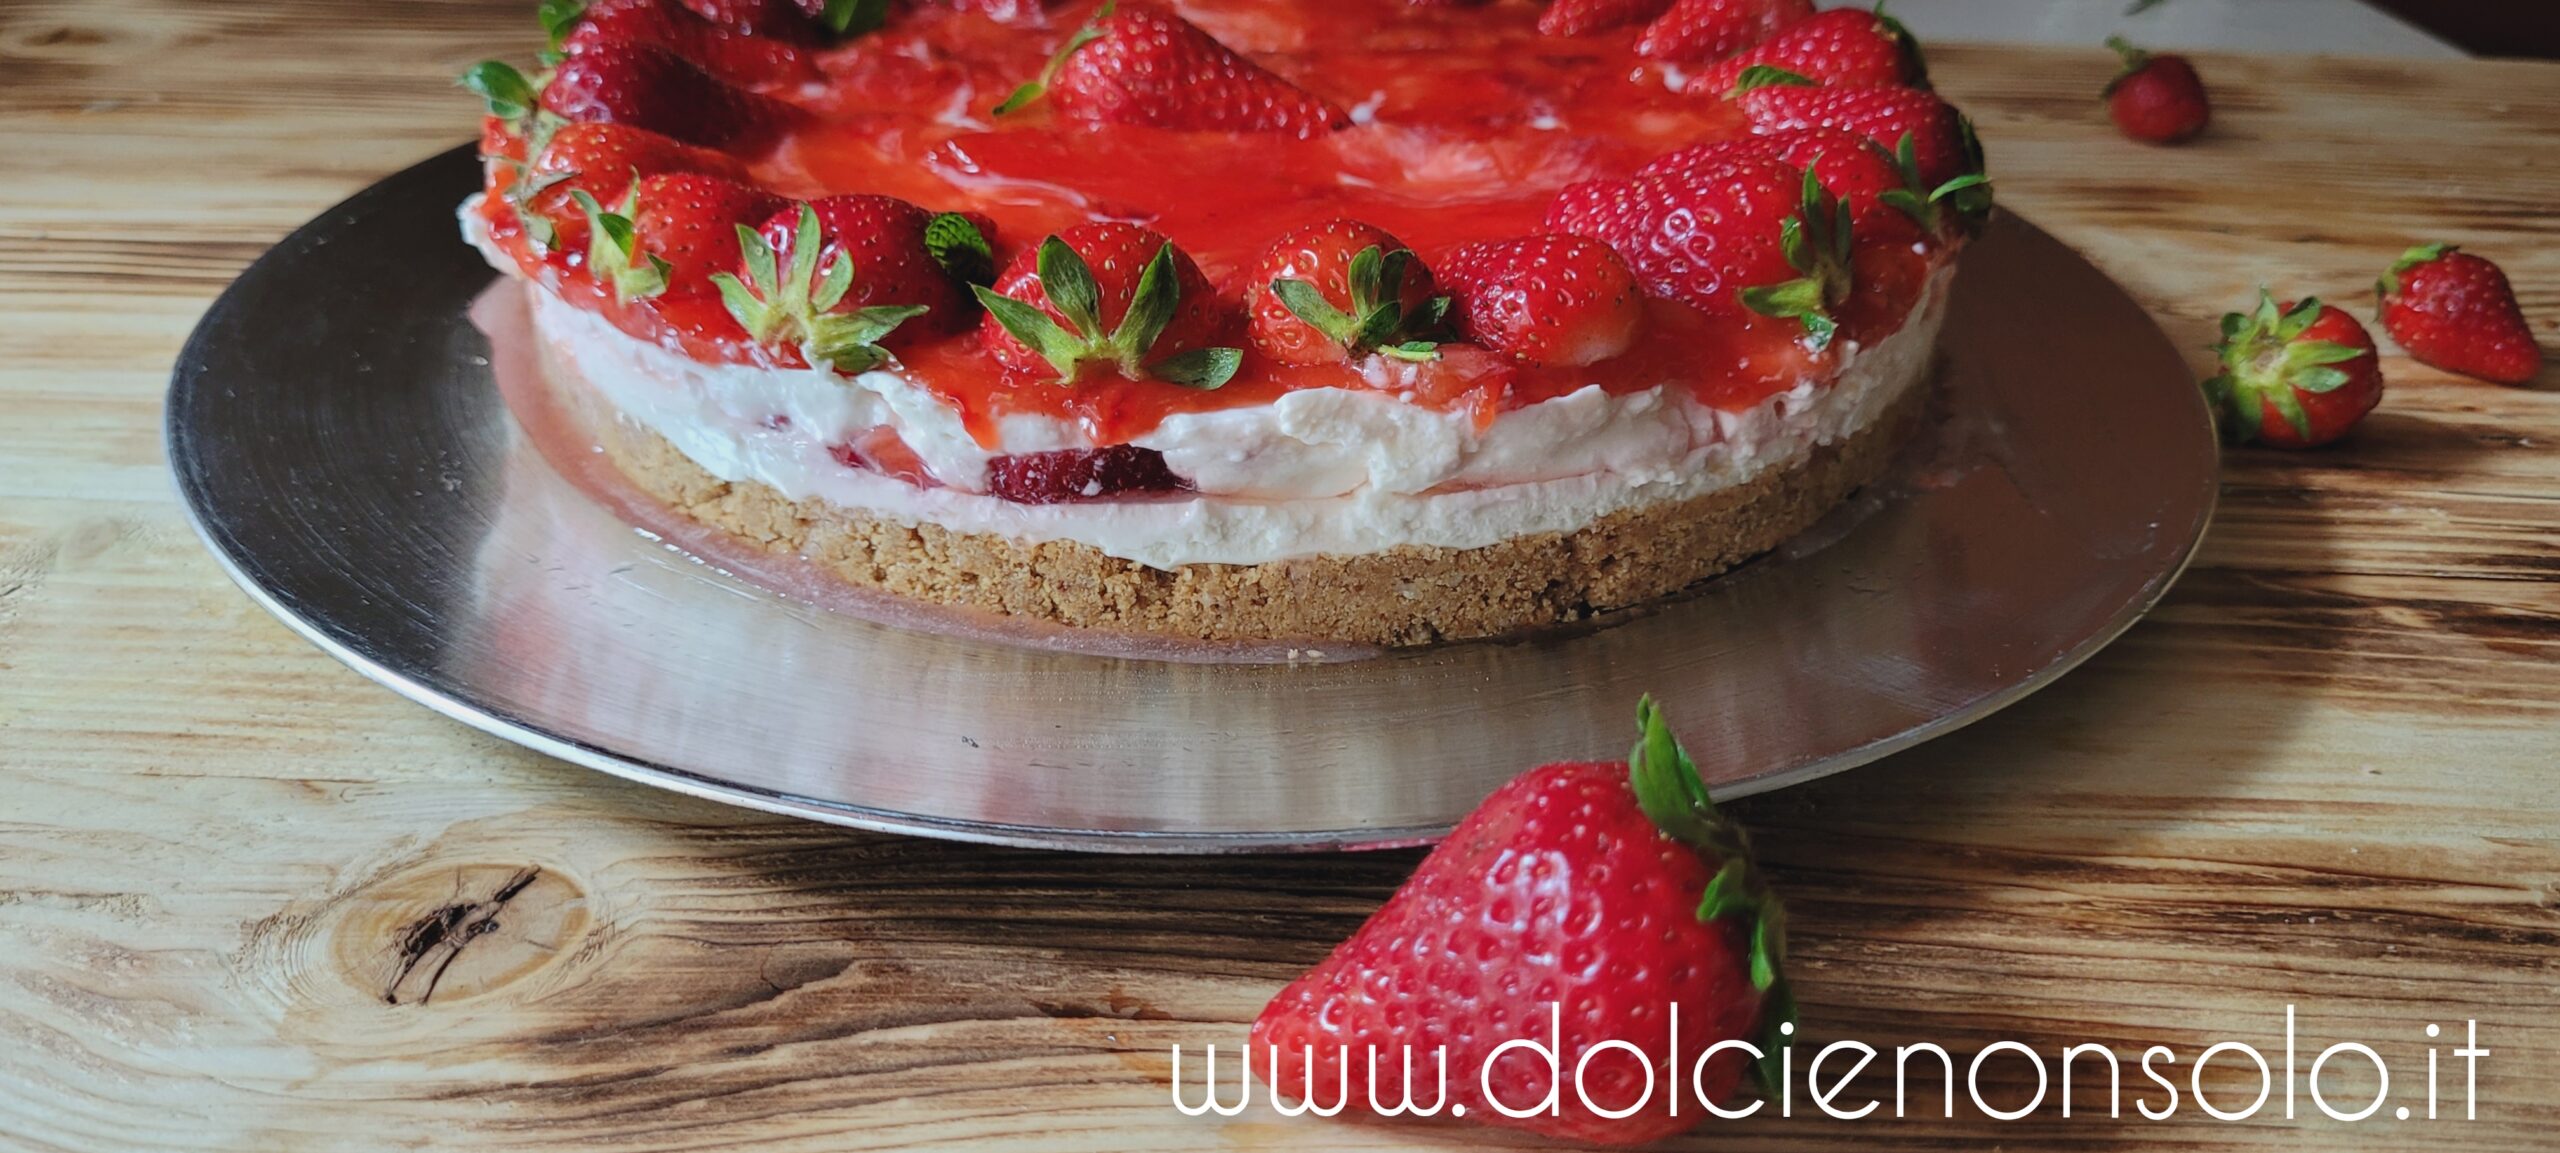 cheesecake alle fragole con coulis